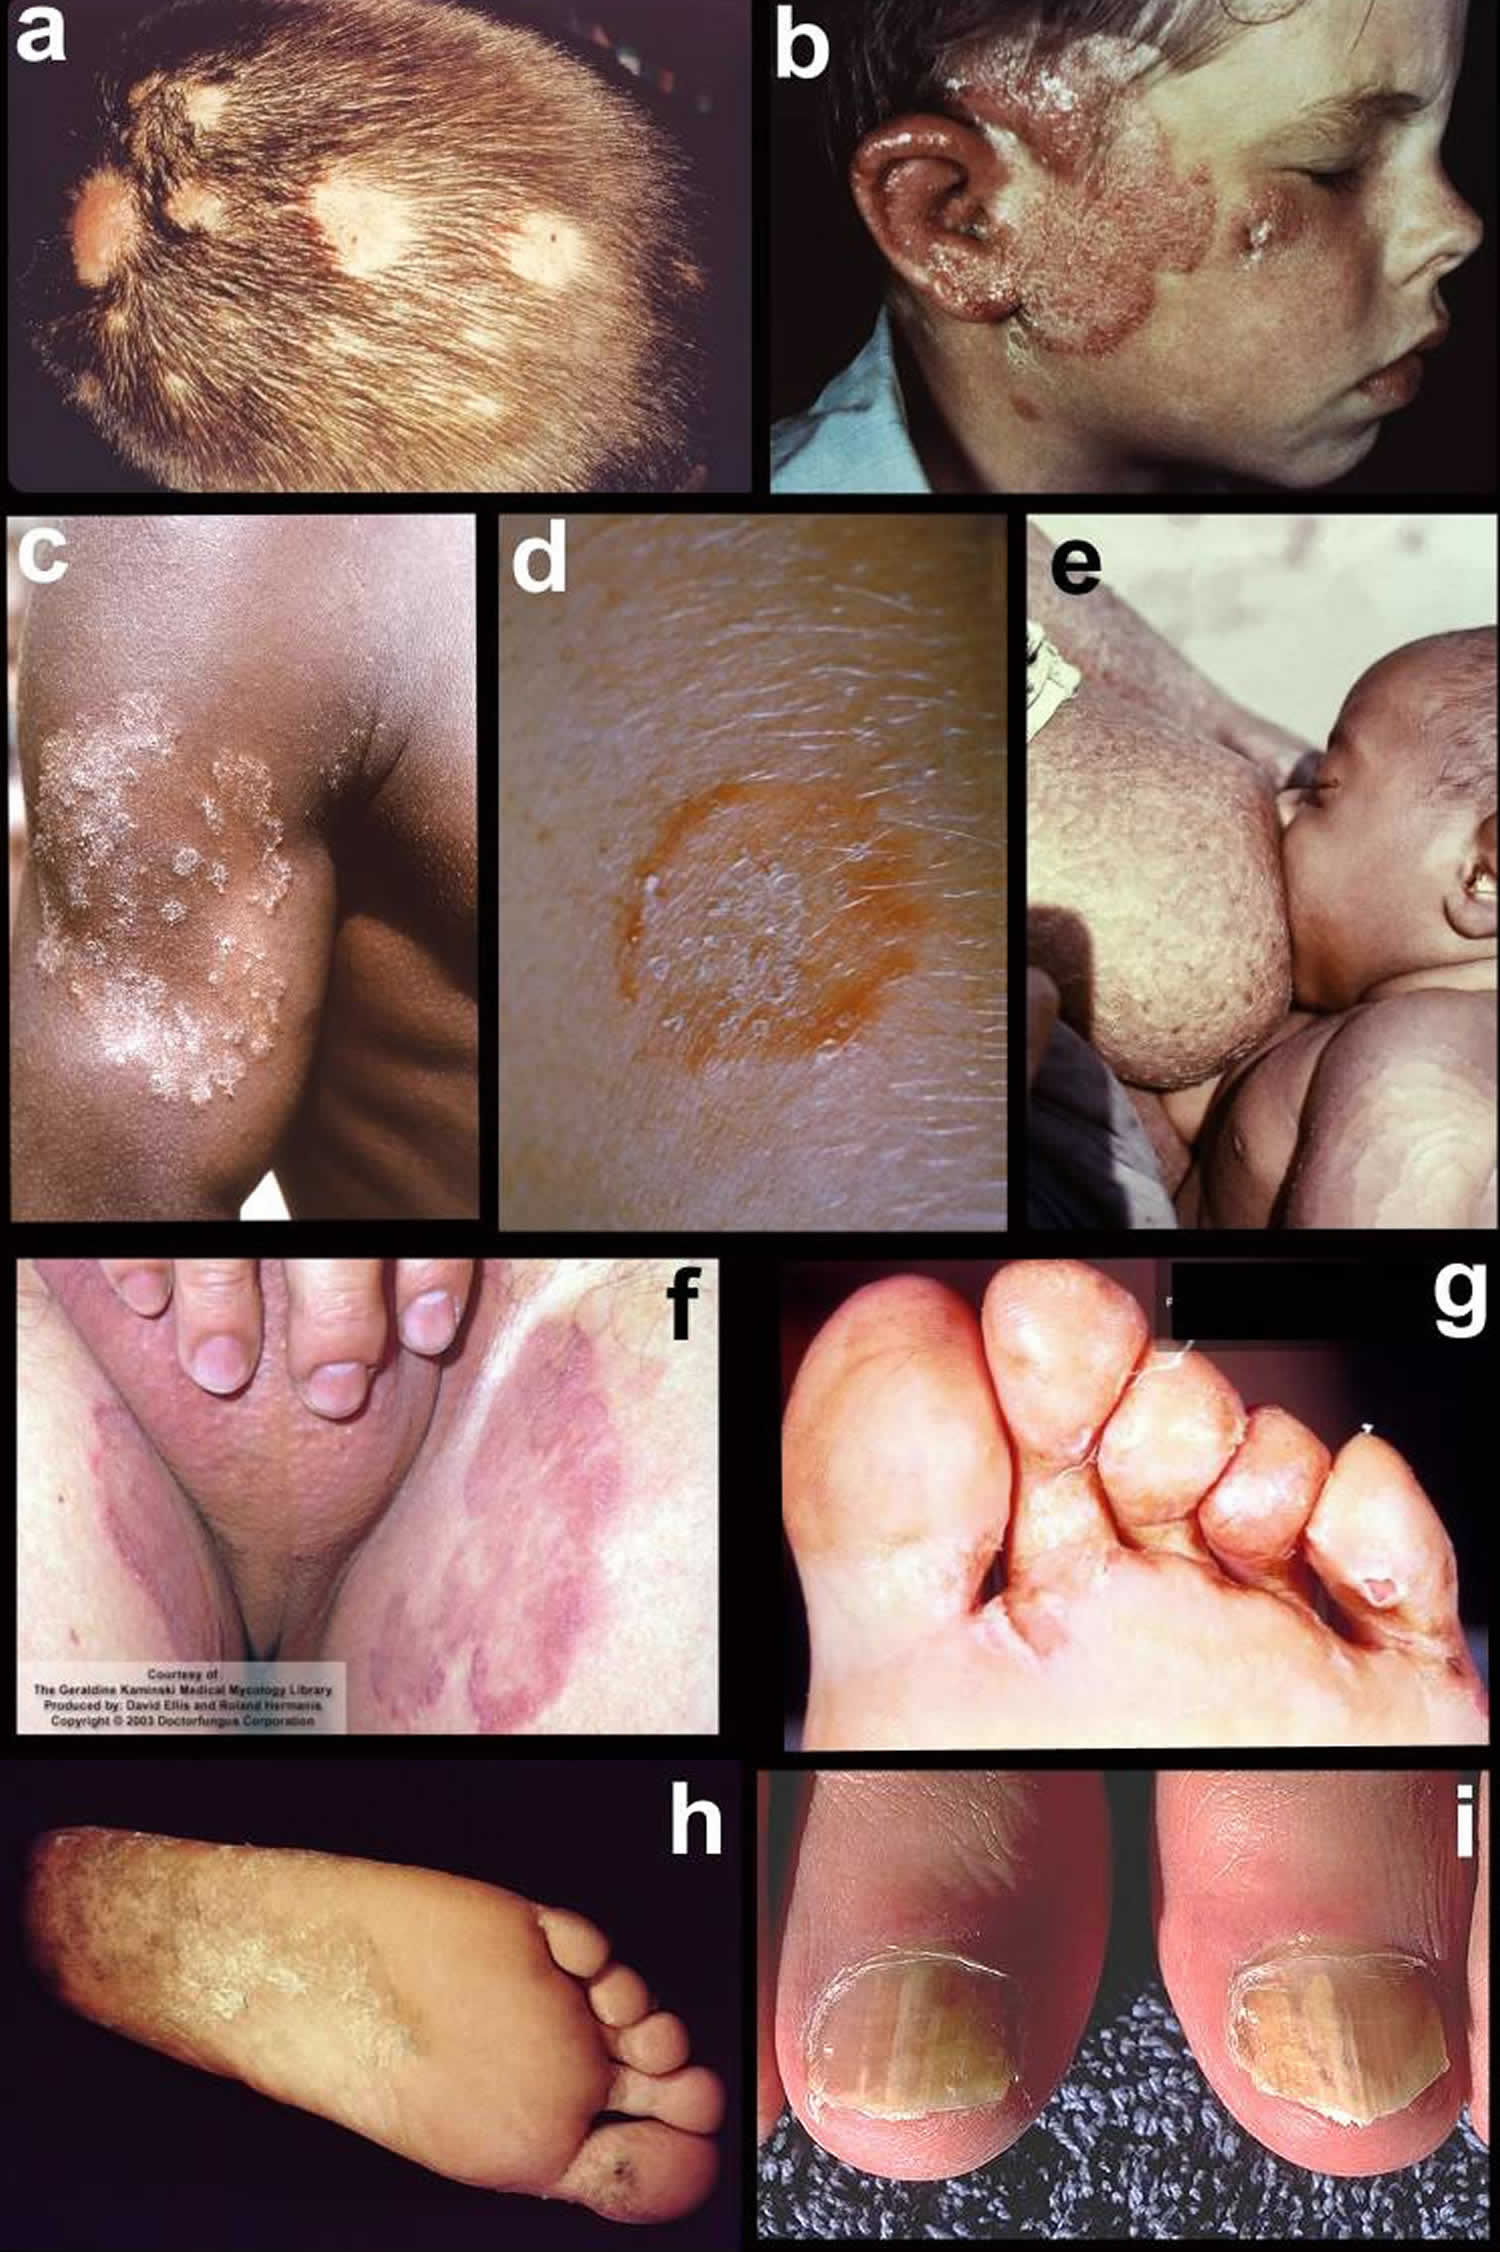 Ringworm throughout the body